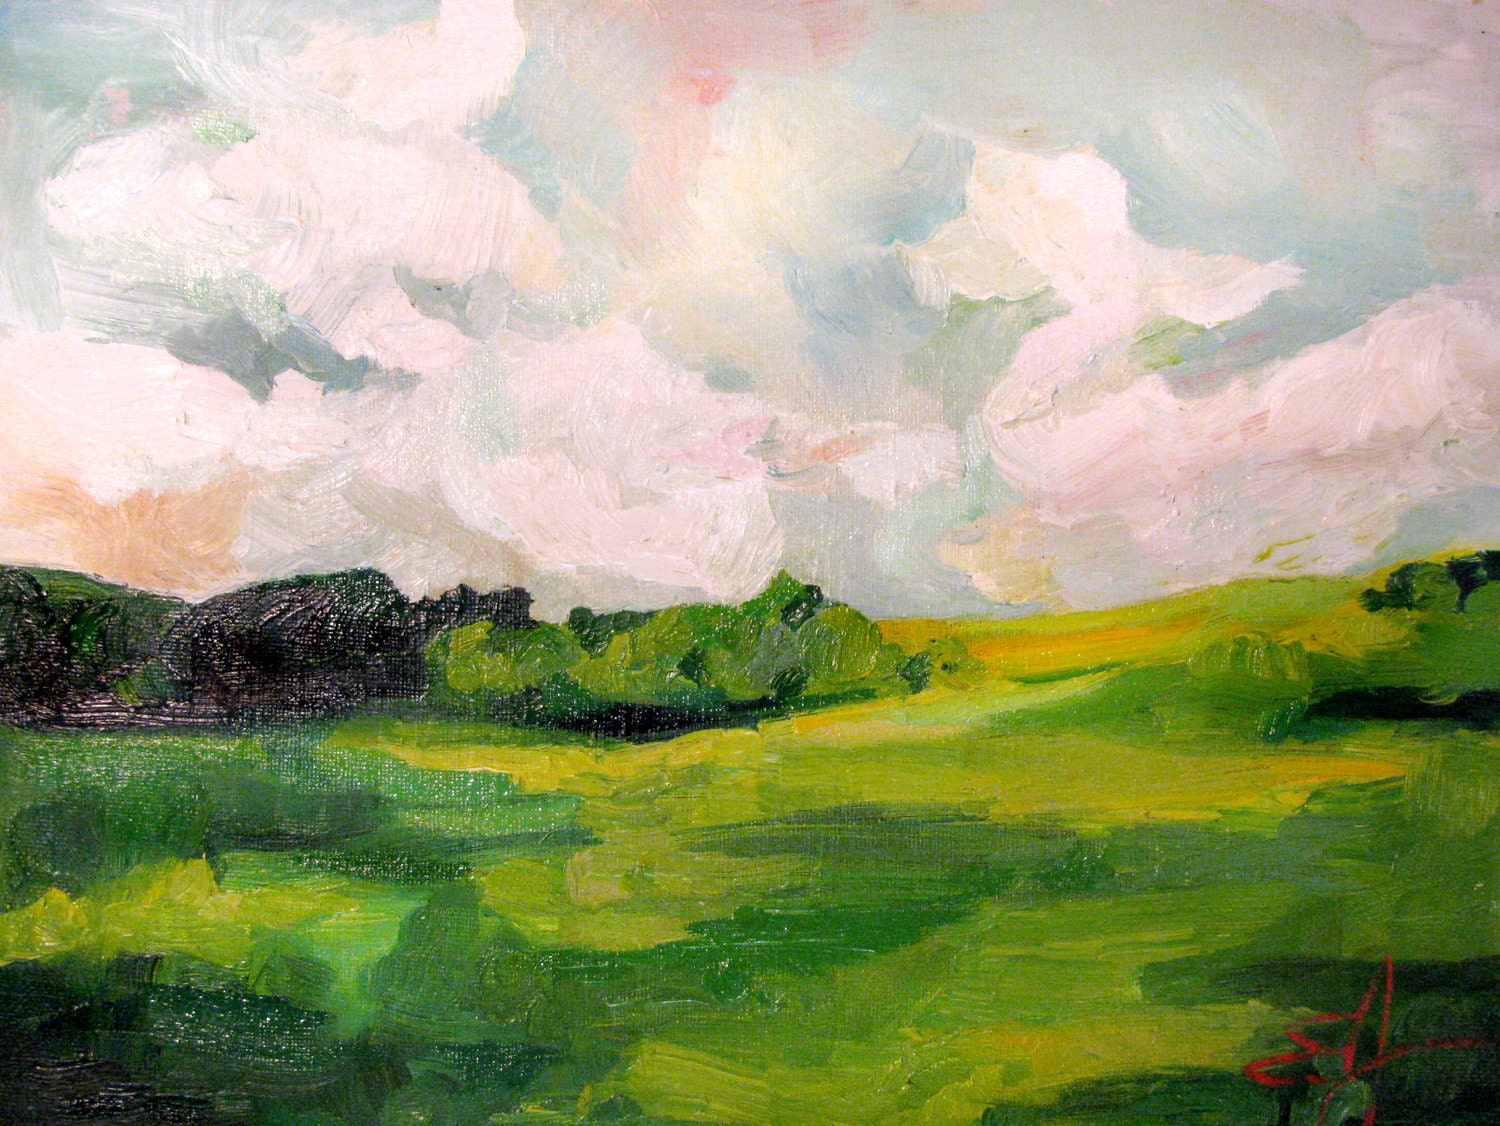 The Grass Looks Greener When the Sky Dances An Original Oil Landscape Painting by Emily Jeffords